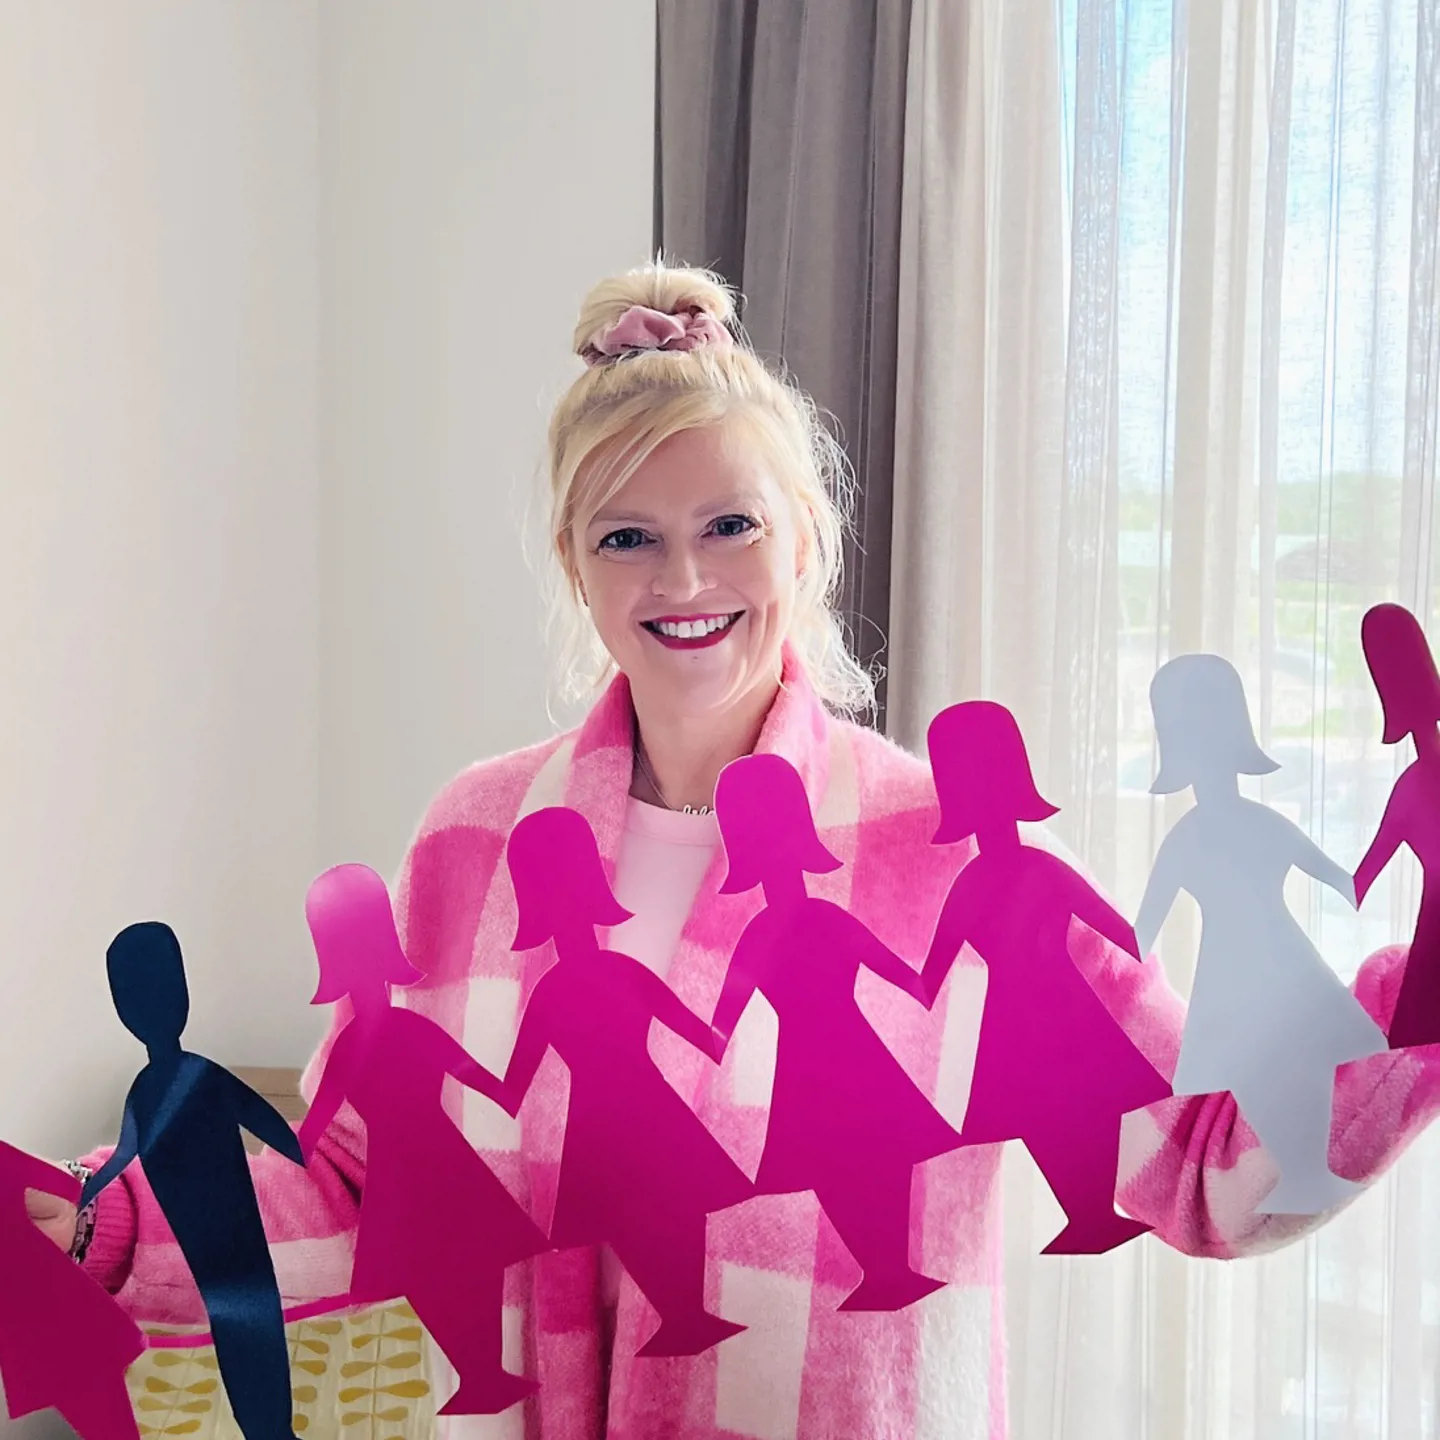 Woman standing in front of a window holding a row of pink ladies and blue men